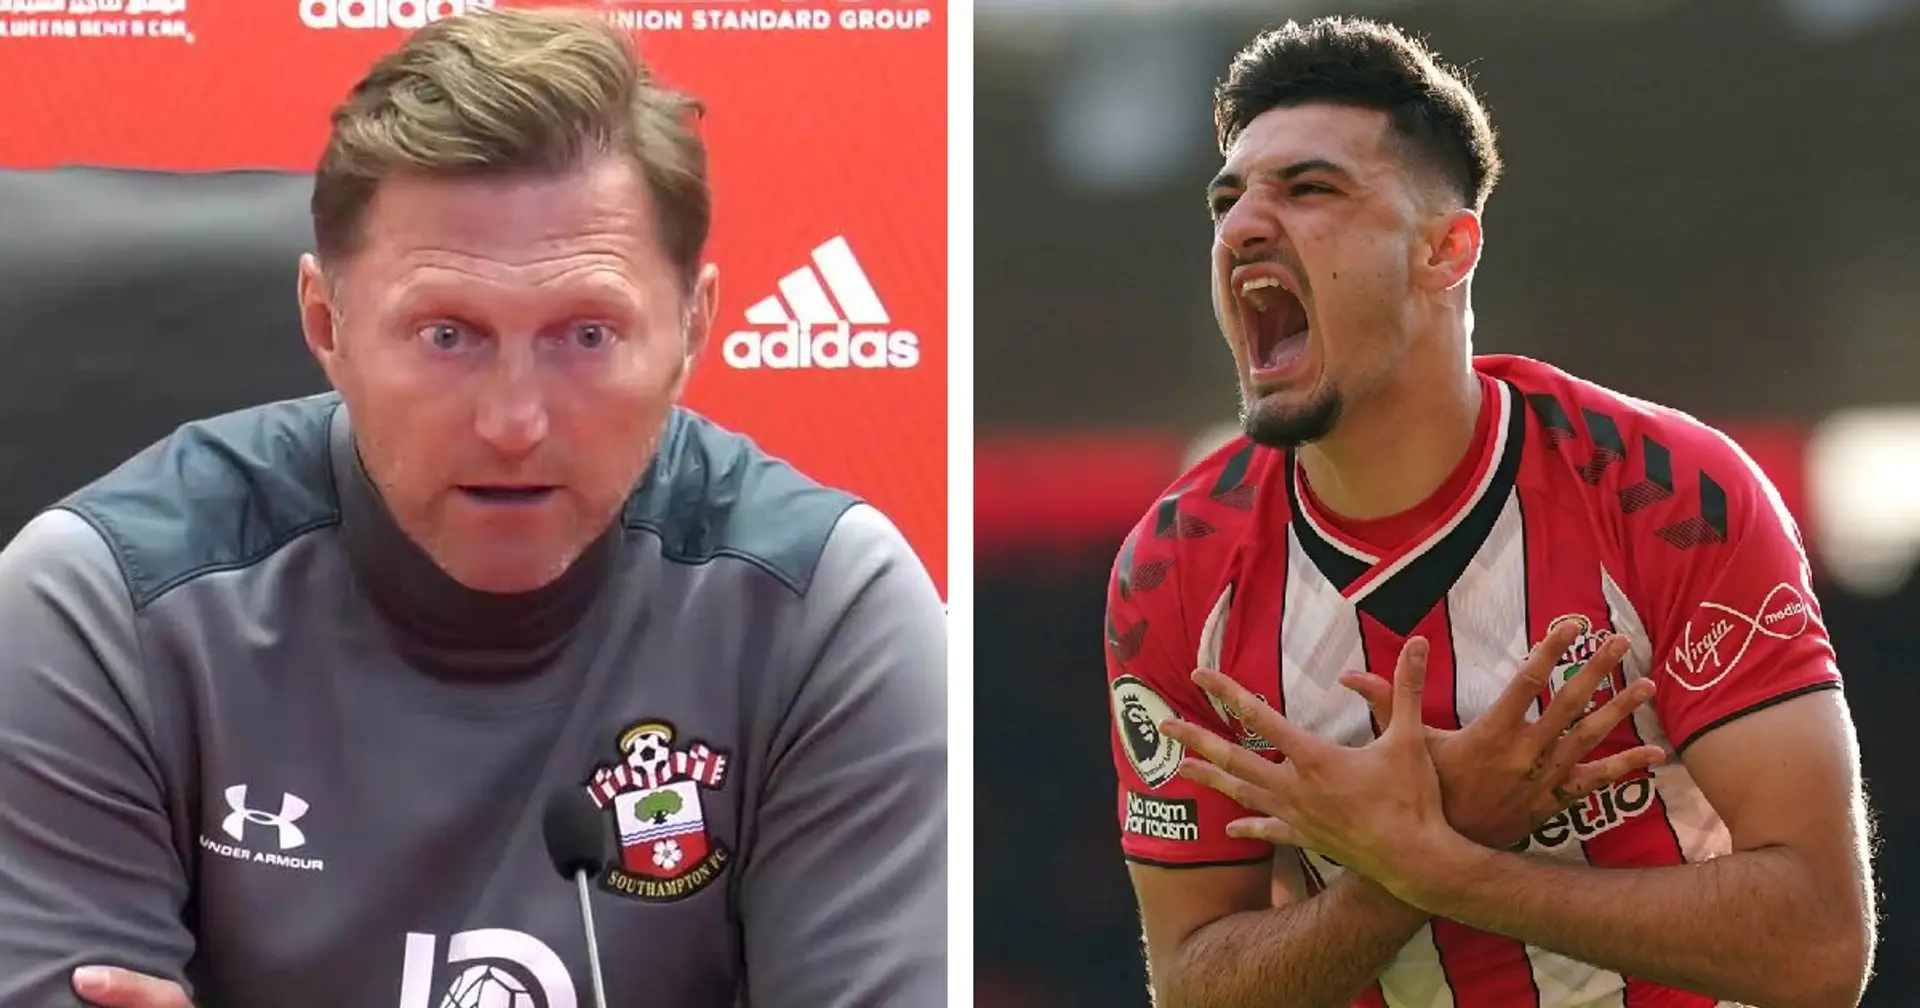 'It's not easy to negotiate with Chelsea': Hasenhuttl wants Broja to stay another year at Southampton